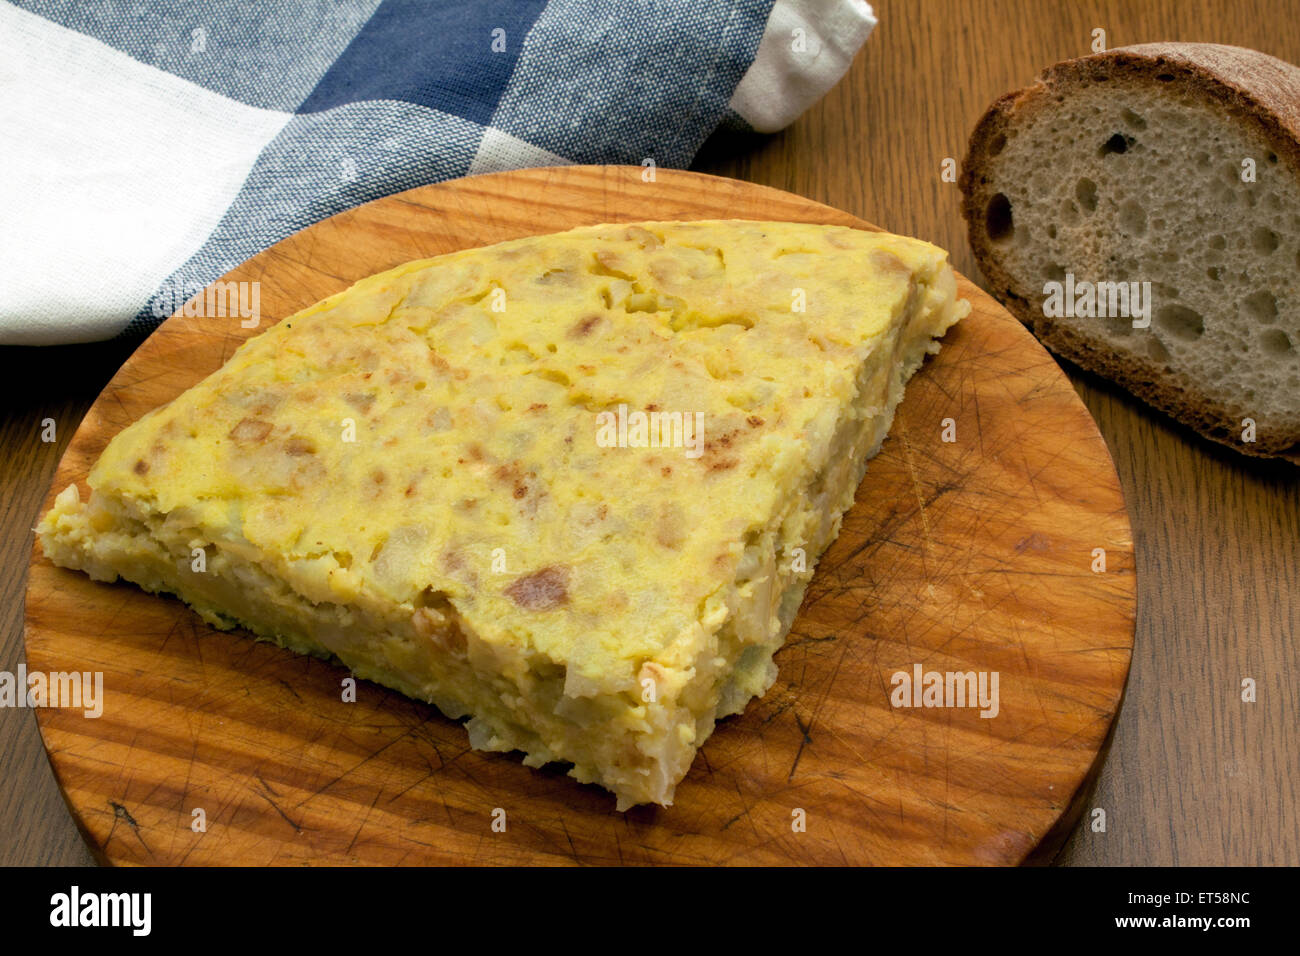 a portion of a traditional spanish omelet over a wooden board Stock Photo